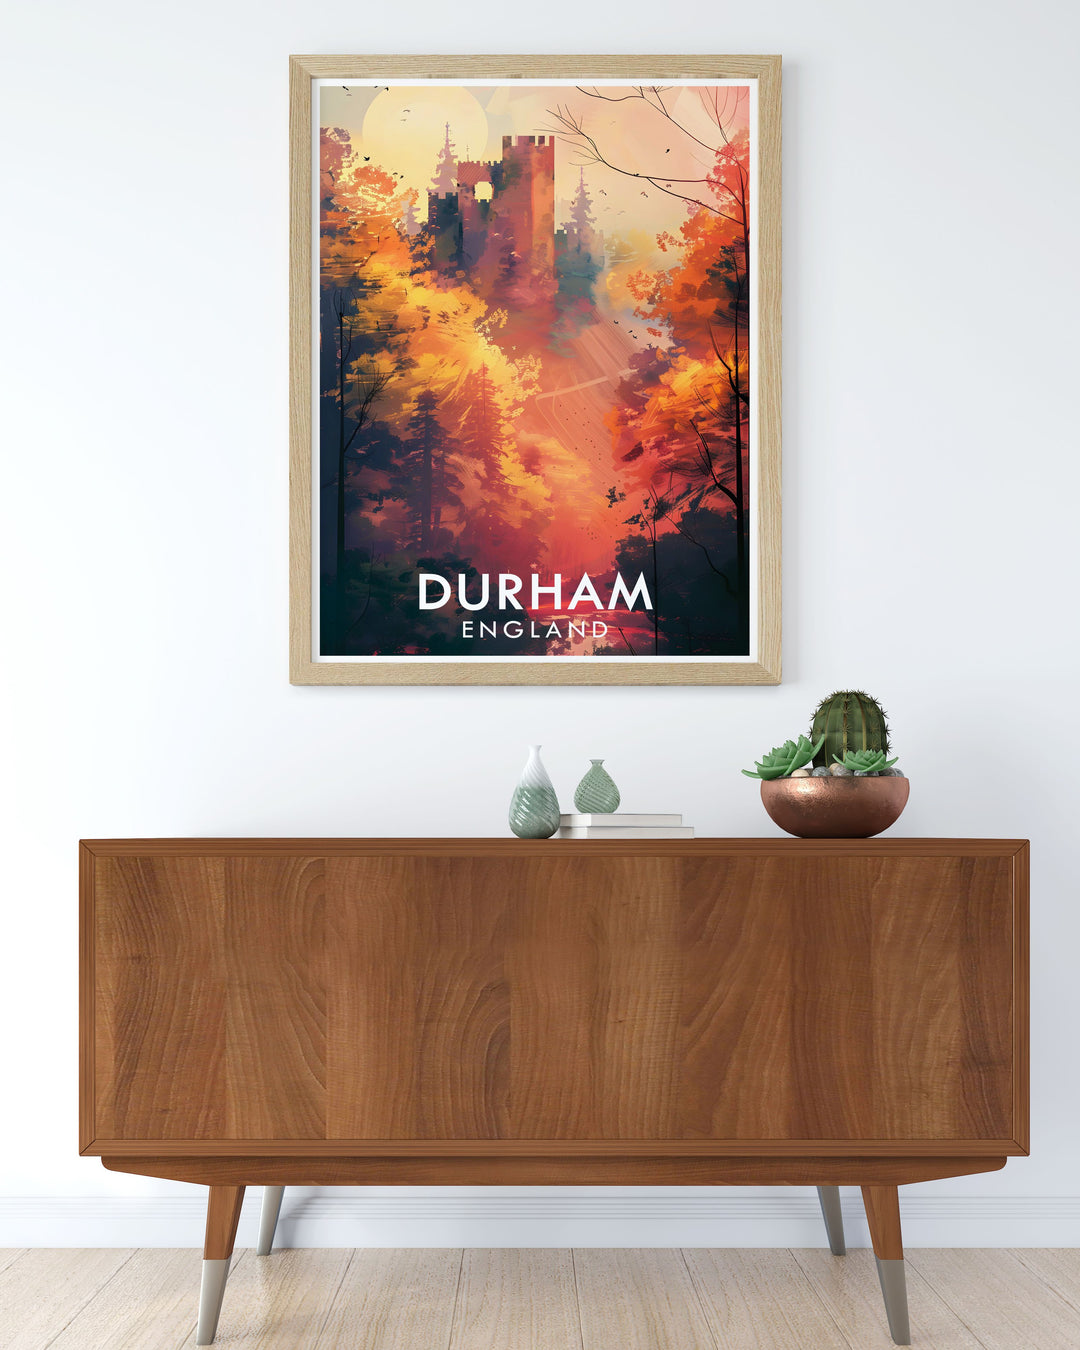 This travel poster of Durham Castle captures the dramatic beauty and historical significance of one of Englands most treasured landmarks, offering a glimpse into the citys past.